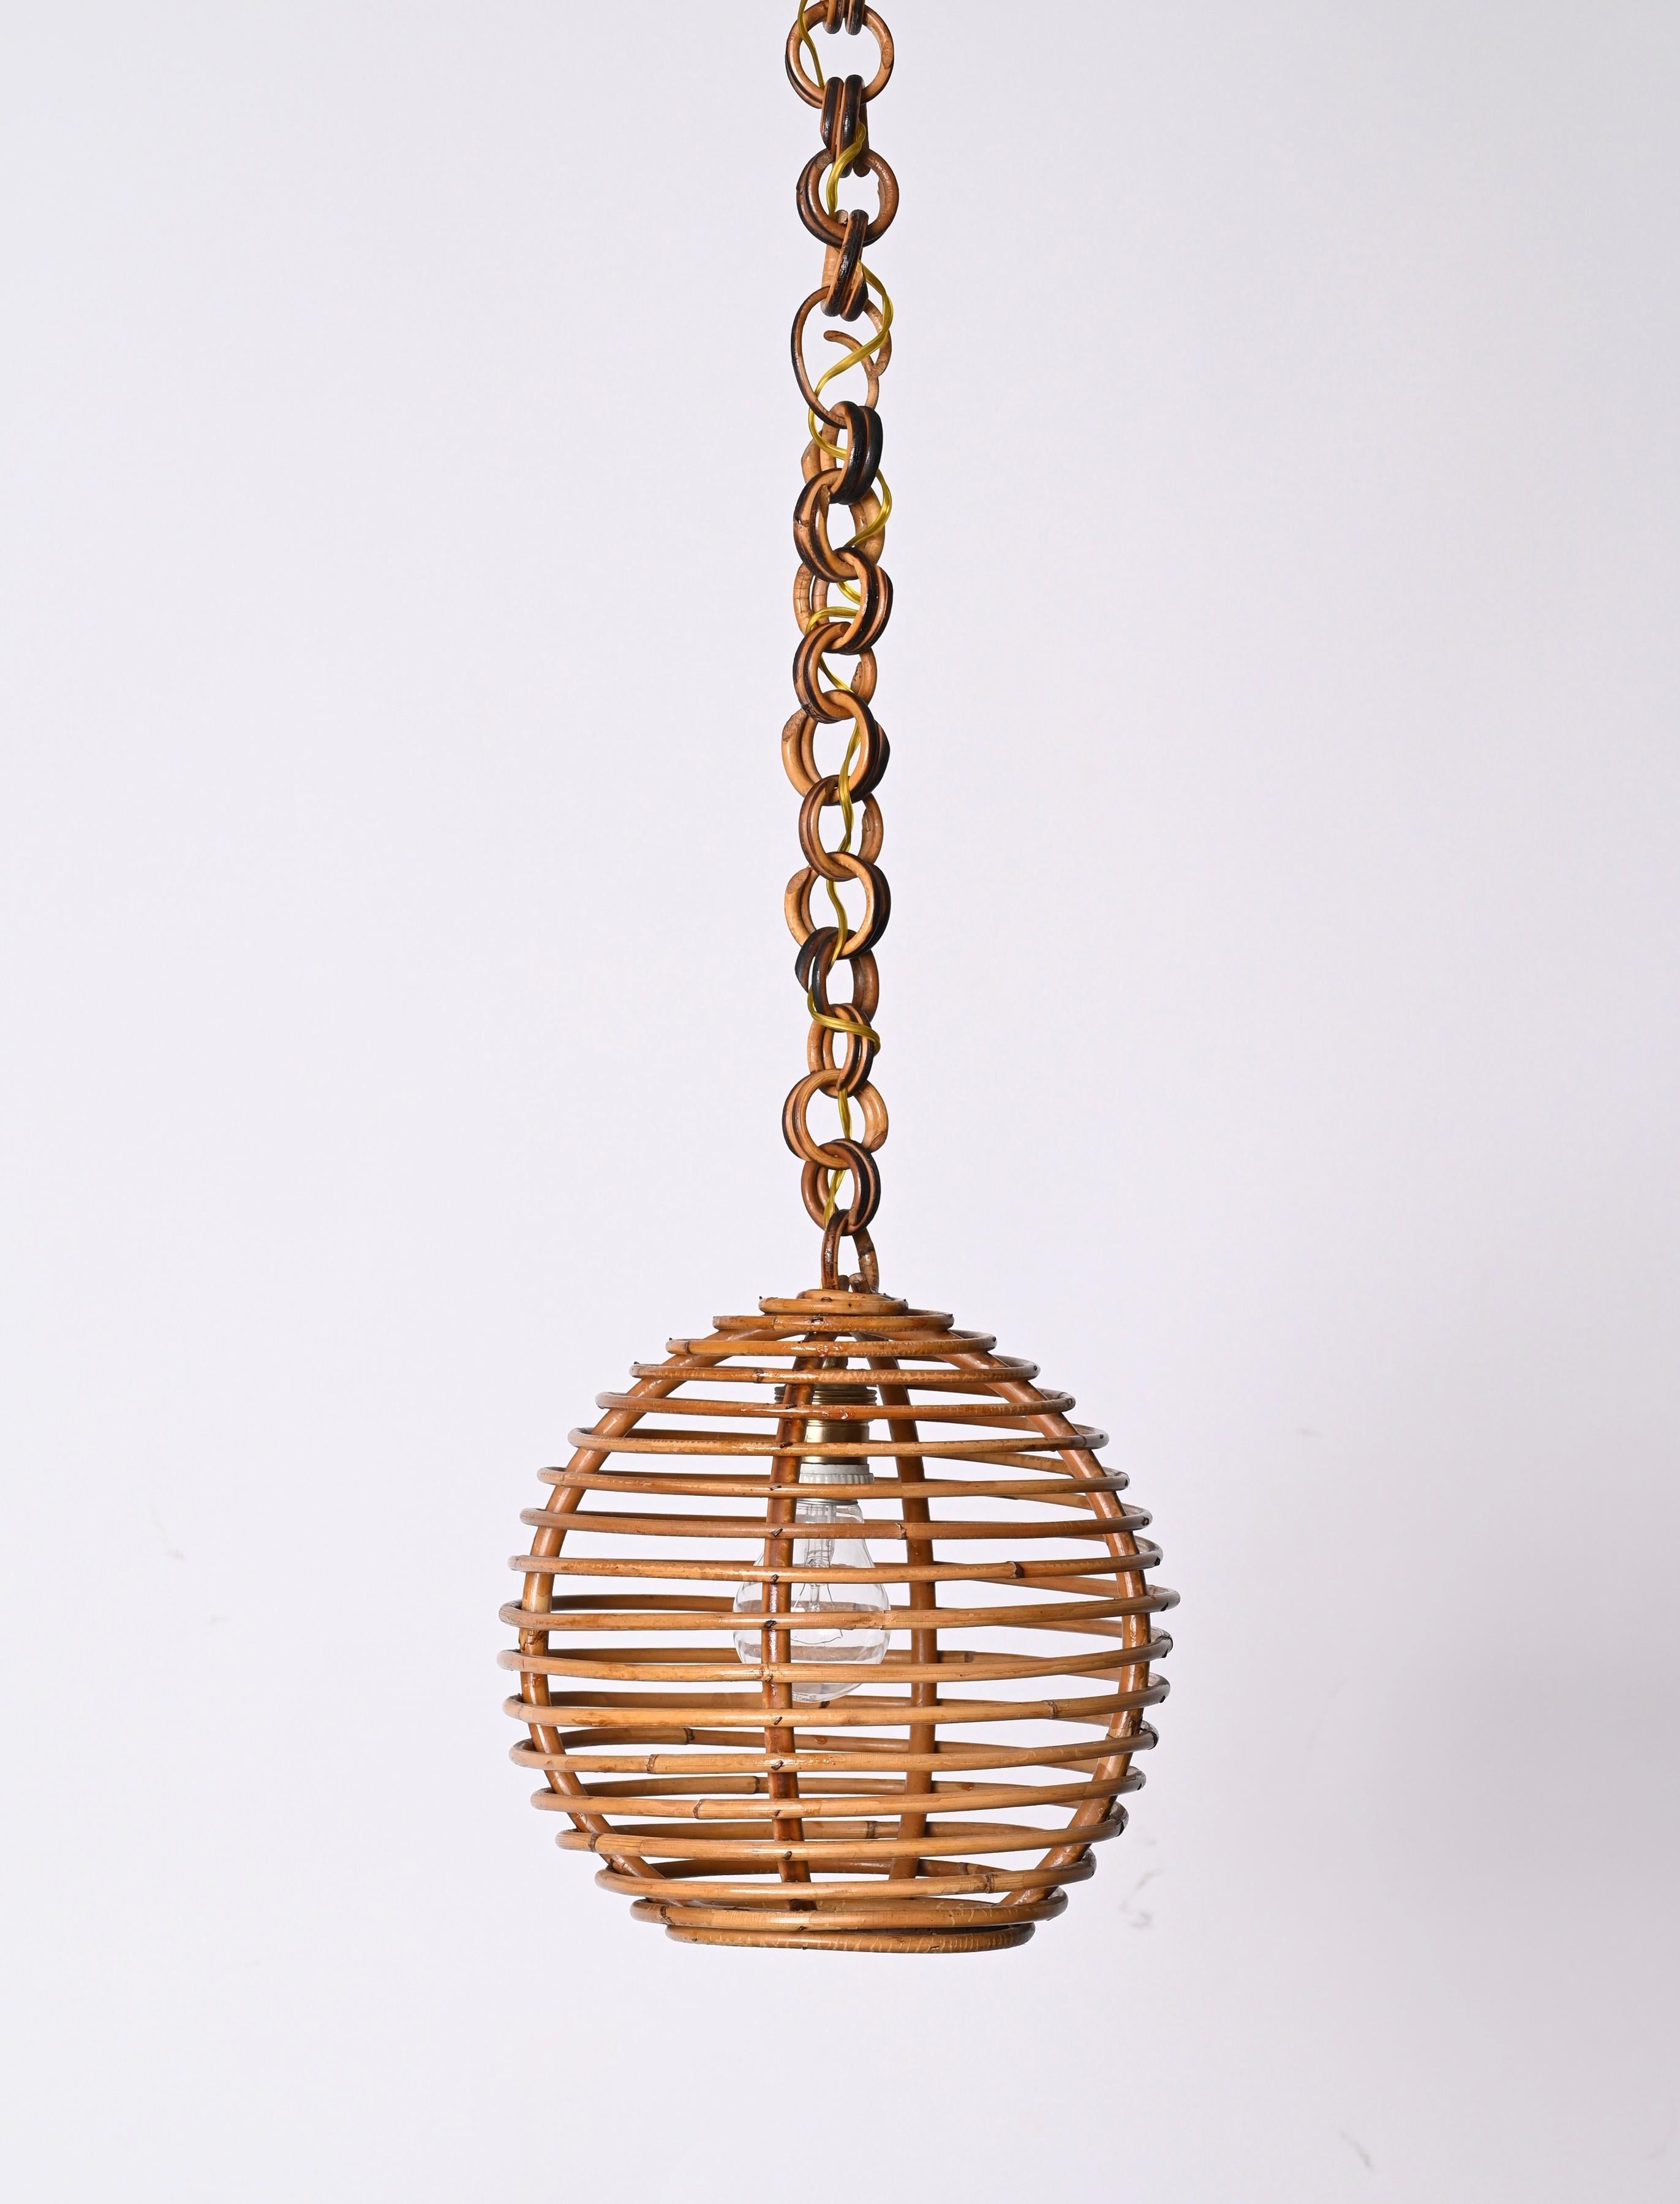 Mid-Century Modern Midcentury French Riviera Bambo and Rattan Spherical Italian Chandelier, 1960s For Sale